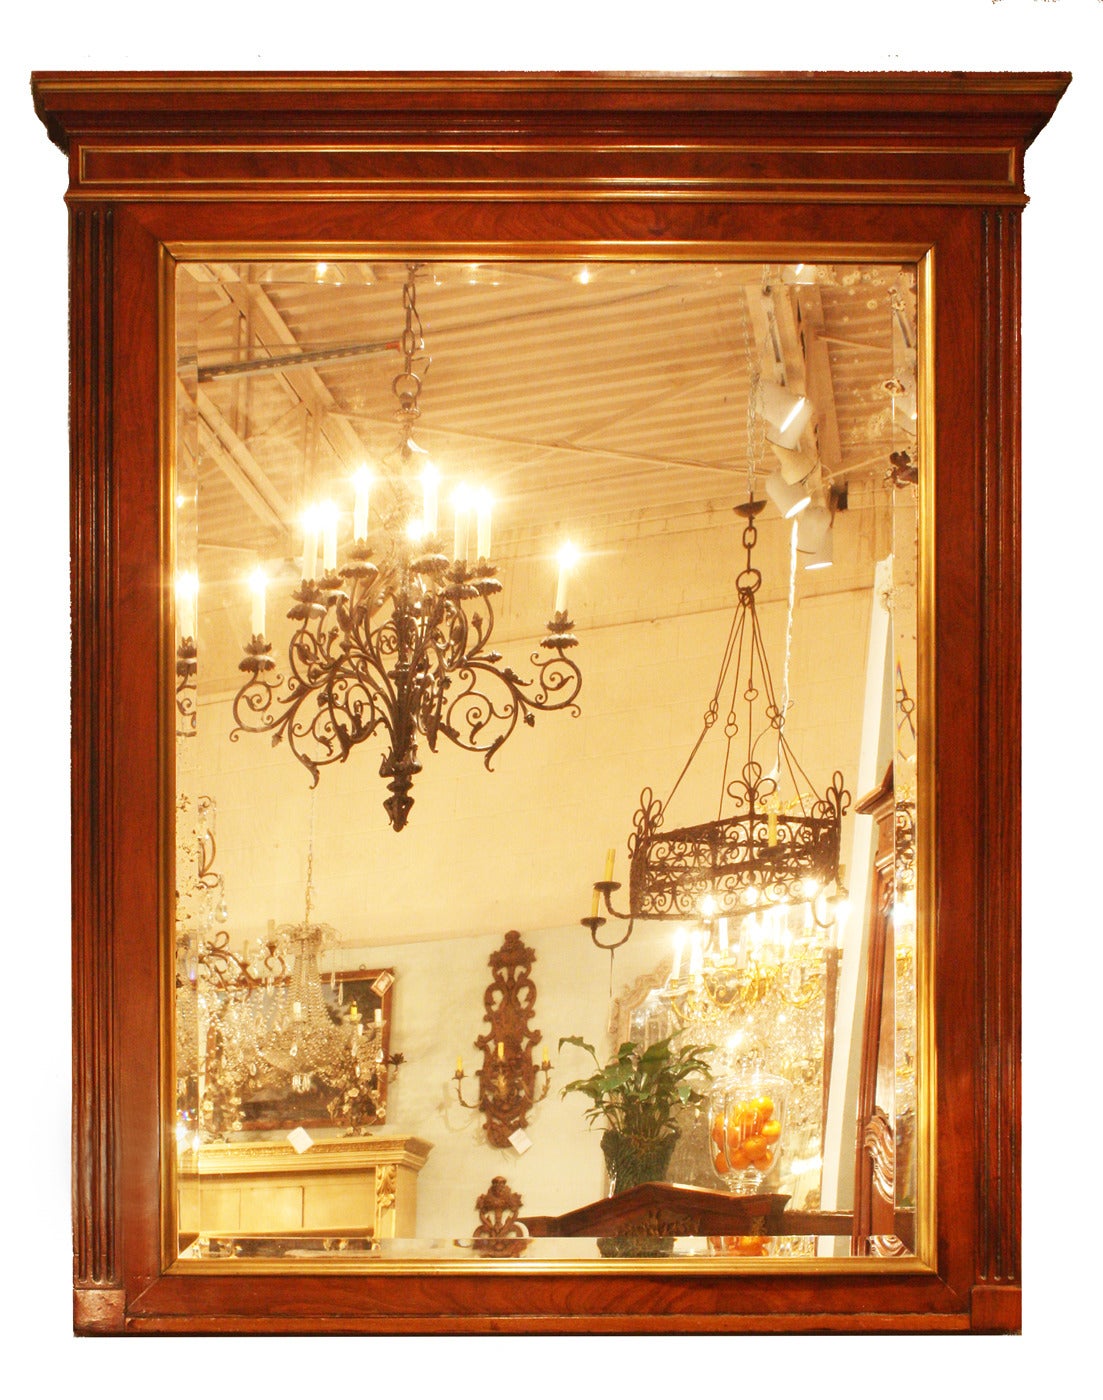 Neoclassical Revival 19th Century French or Russian Neoclassical Mirror